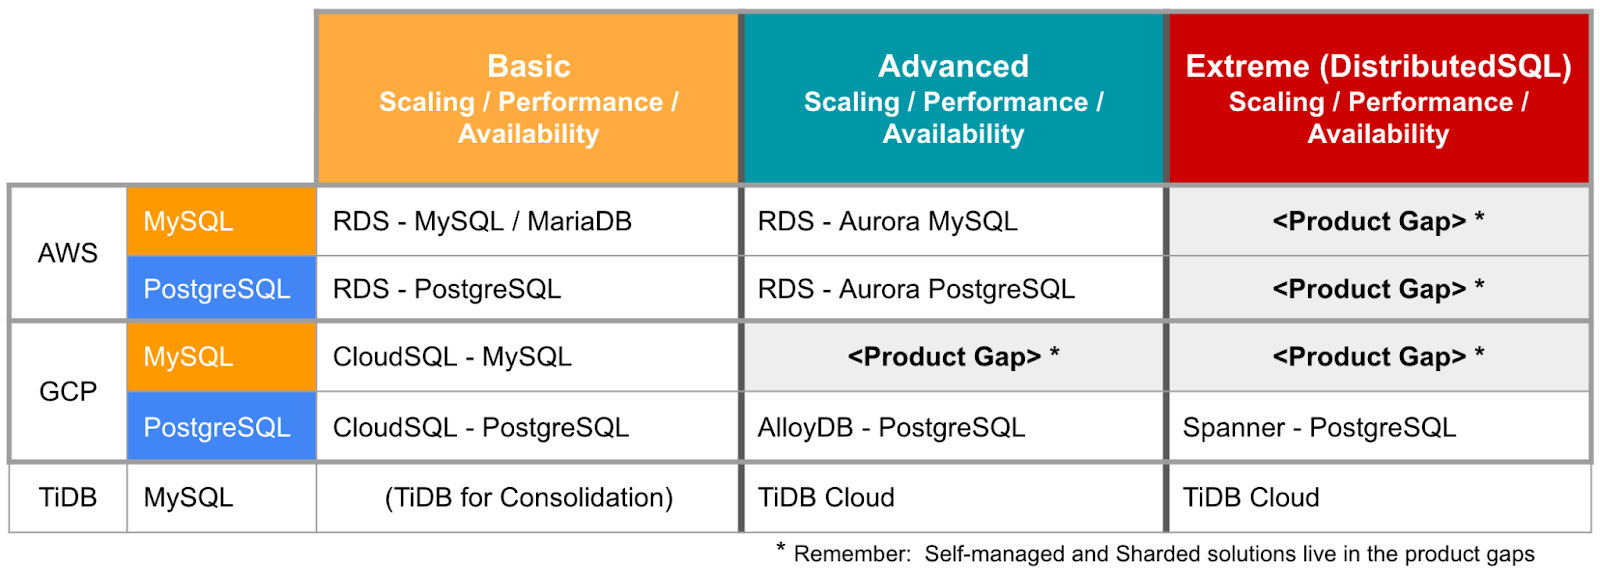 Comparing AWS and GCP MySQL and PostgreSQL offerings with TiDB DBaaS.